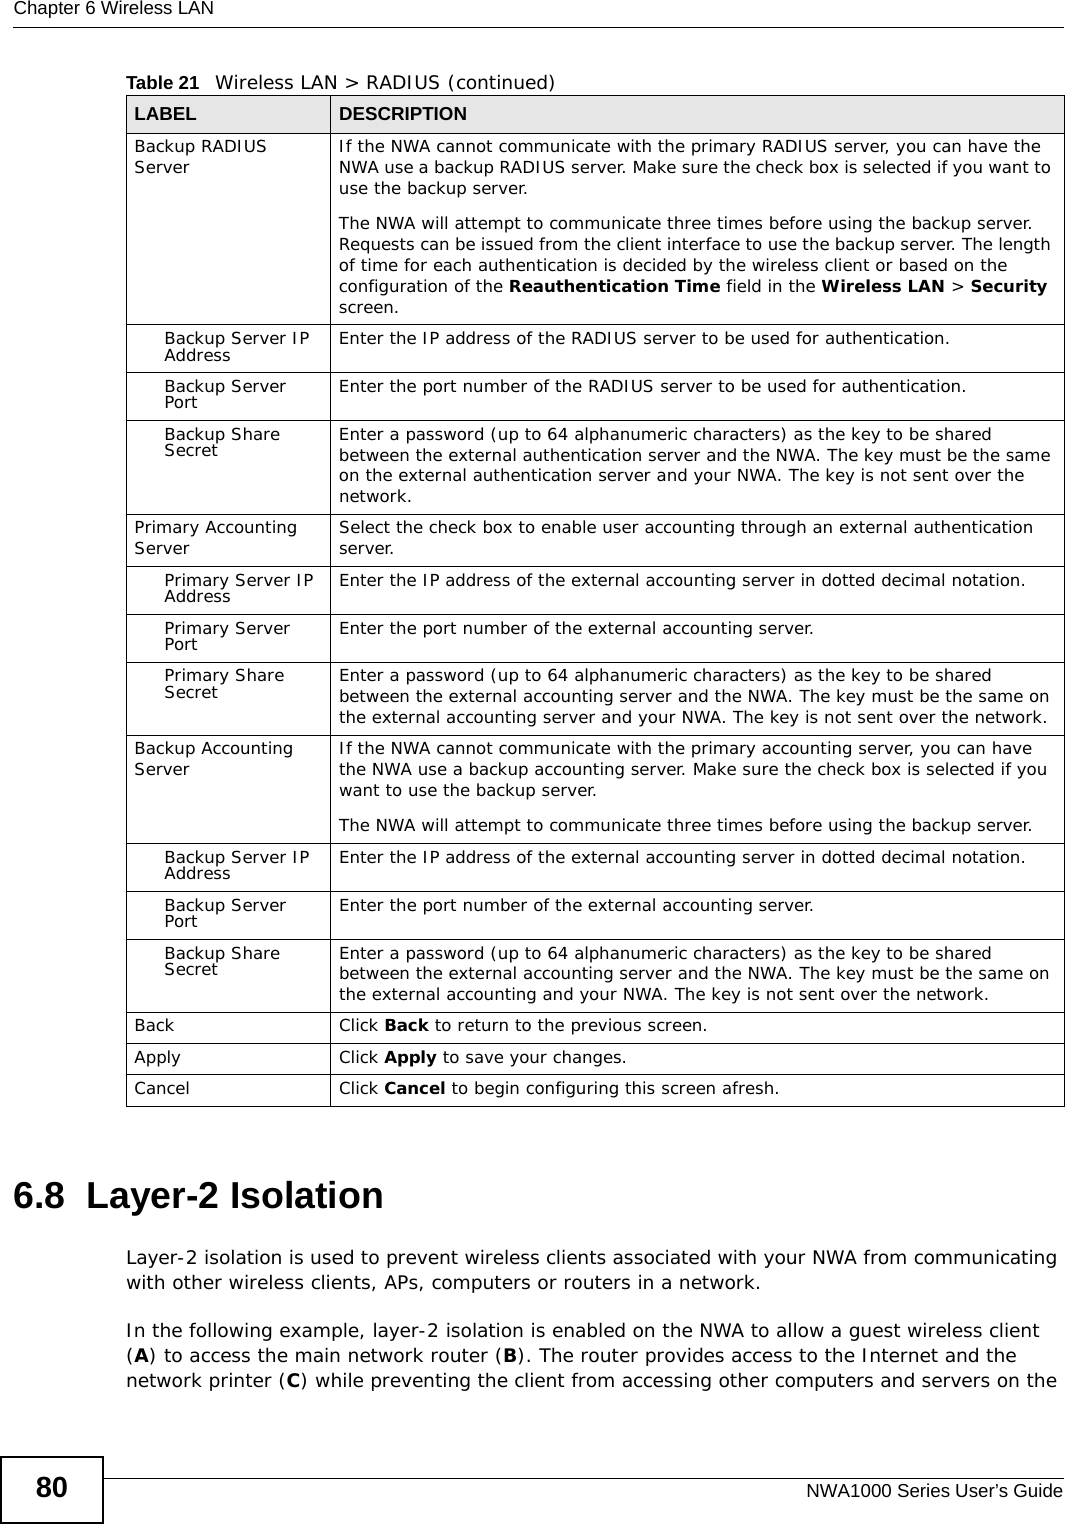 Chapter 6 Wireless LANNWA1000 Series User’s Guide806.8  Layer-2 IsolationLayer-2 isolation is used to prevent wireless clients associated with your NWA from communicating with other wireless clients, APs, computers or routers in a network.In the following example, layer-2 isolation is enabled on the NWA to allow a guest wireless client (A) to access the main network router (B). The router provides access to the Internet and the network printer (C) while preventing the client from accessing other computers and servers on the Backup RADIUS Server  If the NWA cannot communicate with the primary RADIUS server, you can have the NWA use a backup RADIUS server. Make sure the check box is selected if you want to use the backup server.The NWA will attempt to communicate three times before using the backup server. Requests can be issued from the client interface to use the backup server. The length of time for each authentication is decided by the wireless client or based on the configuration of the Reauthentication Time field in the Wireless LAN &gt; Security screen.Backup Server IP Address Enter the IP address of the RADIUS server to be used for authentication.Backup Server Port  Enter the port number of the RADIUS server to be used for authentication. Backup Share Secret Enter a password (up to 64 alphanumeric characters) as the key to be shared between the external authentication server and the NWA. The key must be the same on the external authentication server and your NWA. The key is not sent over the network.Primary Accounting Server Select the check box to enable user accounting through an external authentication server.Primary Server IP Address Enter the IP address of the external accounting server in dotted decimal notation. Primary Server Port  Enter the port number of the external accounting server. Primary Share Secret Enter a password (up to 64 alphanumeric characters) as the key to be shared between the external accounting server and the NWA. The key must be the same on the external accounting server and your NWA. The key is not sent over the network.Backup Accounting Server  If the NWA cannot communicate with the primary accounting server, you can have the NWA use a backup accounting server. Make sure the check box is selected if you want to use the backup server.The NWA will attempt to communicate three times before using the backup server. Backup Server IP Address Enter the IP address of the external accounting server in dotted decimal notation. Backup Server Port  Enter the port number of the external accounting server. Backup Share Secret Enter a password (up to 64 alphanumeric characters) as the key to be shared between the external accounting server and the NWA. The key must be the same on the external accounting and your NWA. The key is not sent over the network.Back Click Back to return to the previous screen.Apply Click Apply to save your changes.Cancel Click Cancel to begin configuring this screen afresh.Table 21   Wireless LAN &gt; RADIUS (continued)LABEL DESCRIPTION